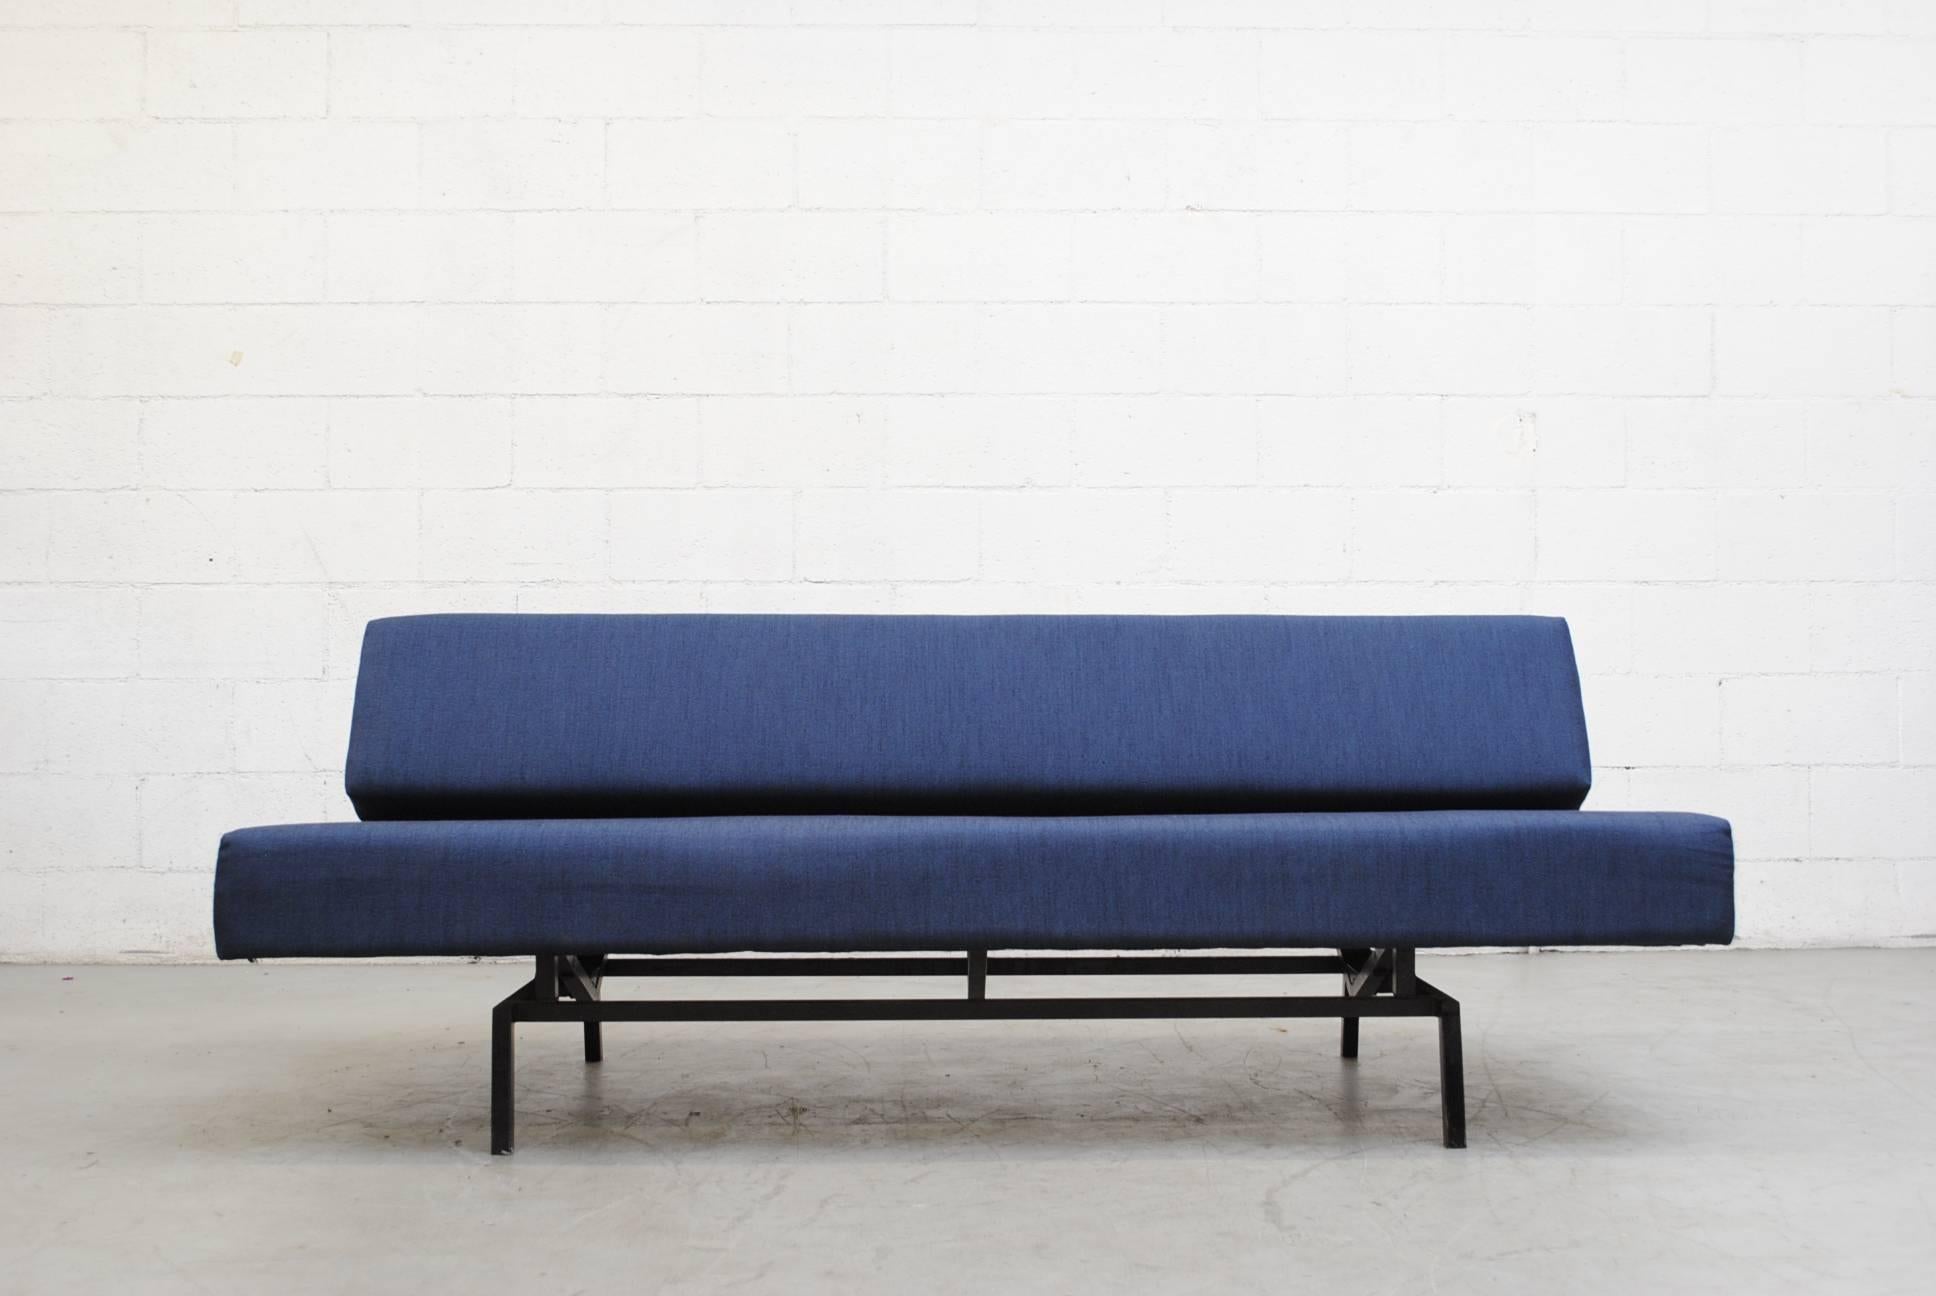 Beautiful Martin Visser sleeper sofa with pull out bench that levels to day bed size. Newer indigo blue upholstery. Black enameled metal frame in original condition with visible signs of wear. Other similar daybeds available (LU92244227923) and